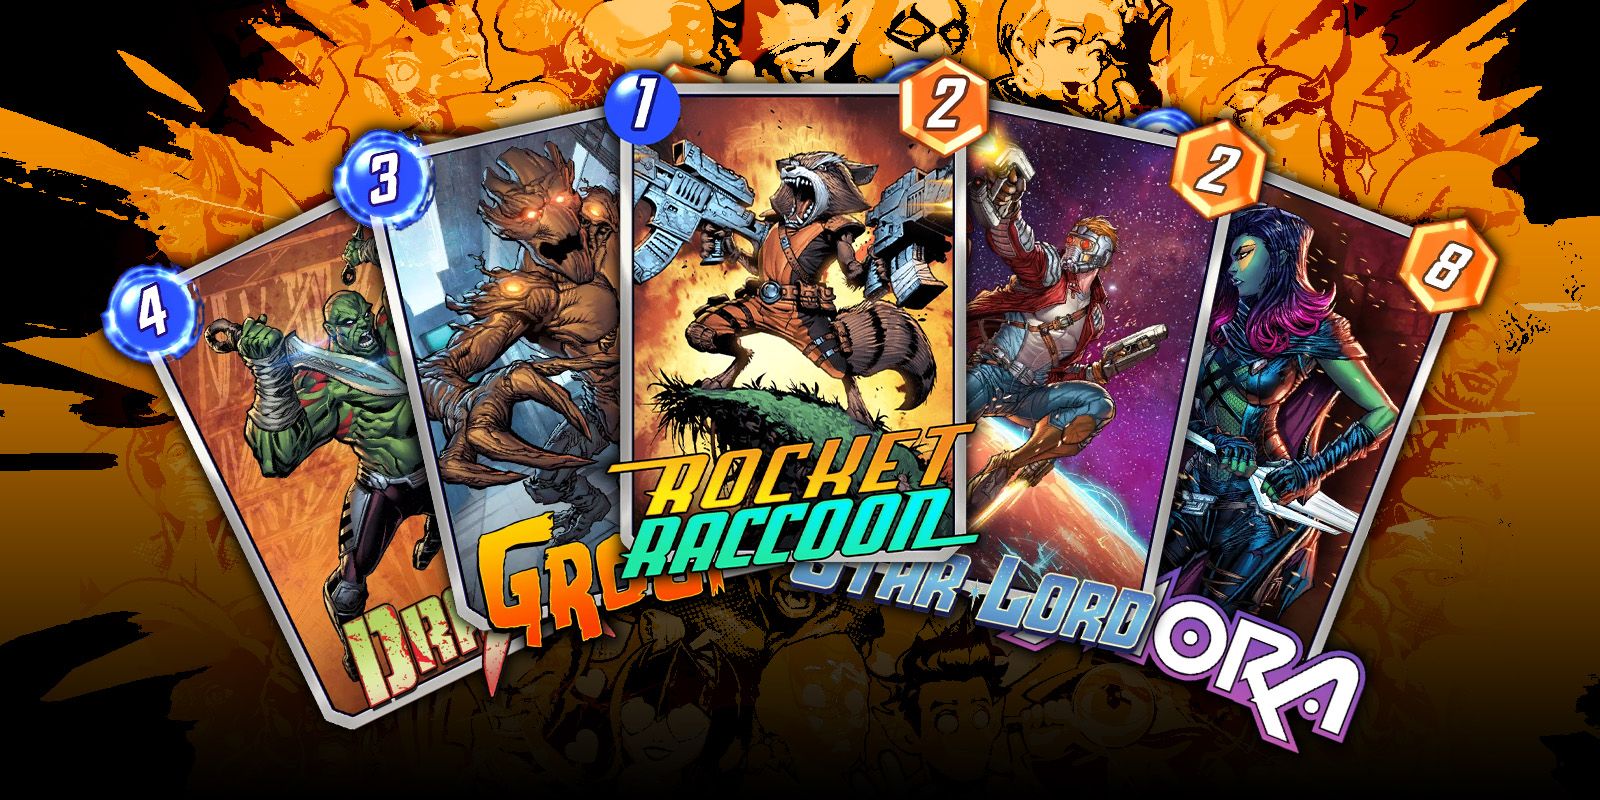 The Rocket Racoon, Groot, Starlord, Drax, & Gamora cards from Marvel Snap